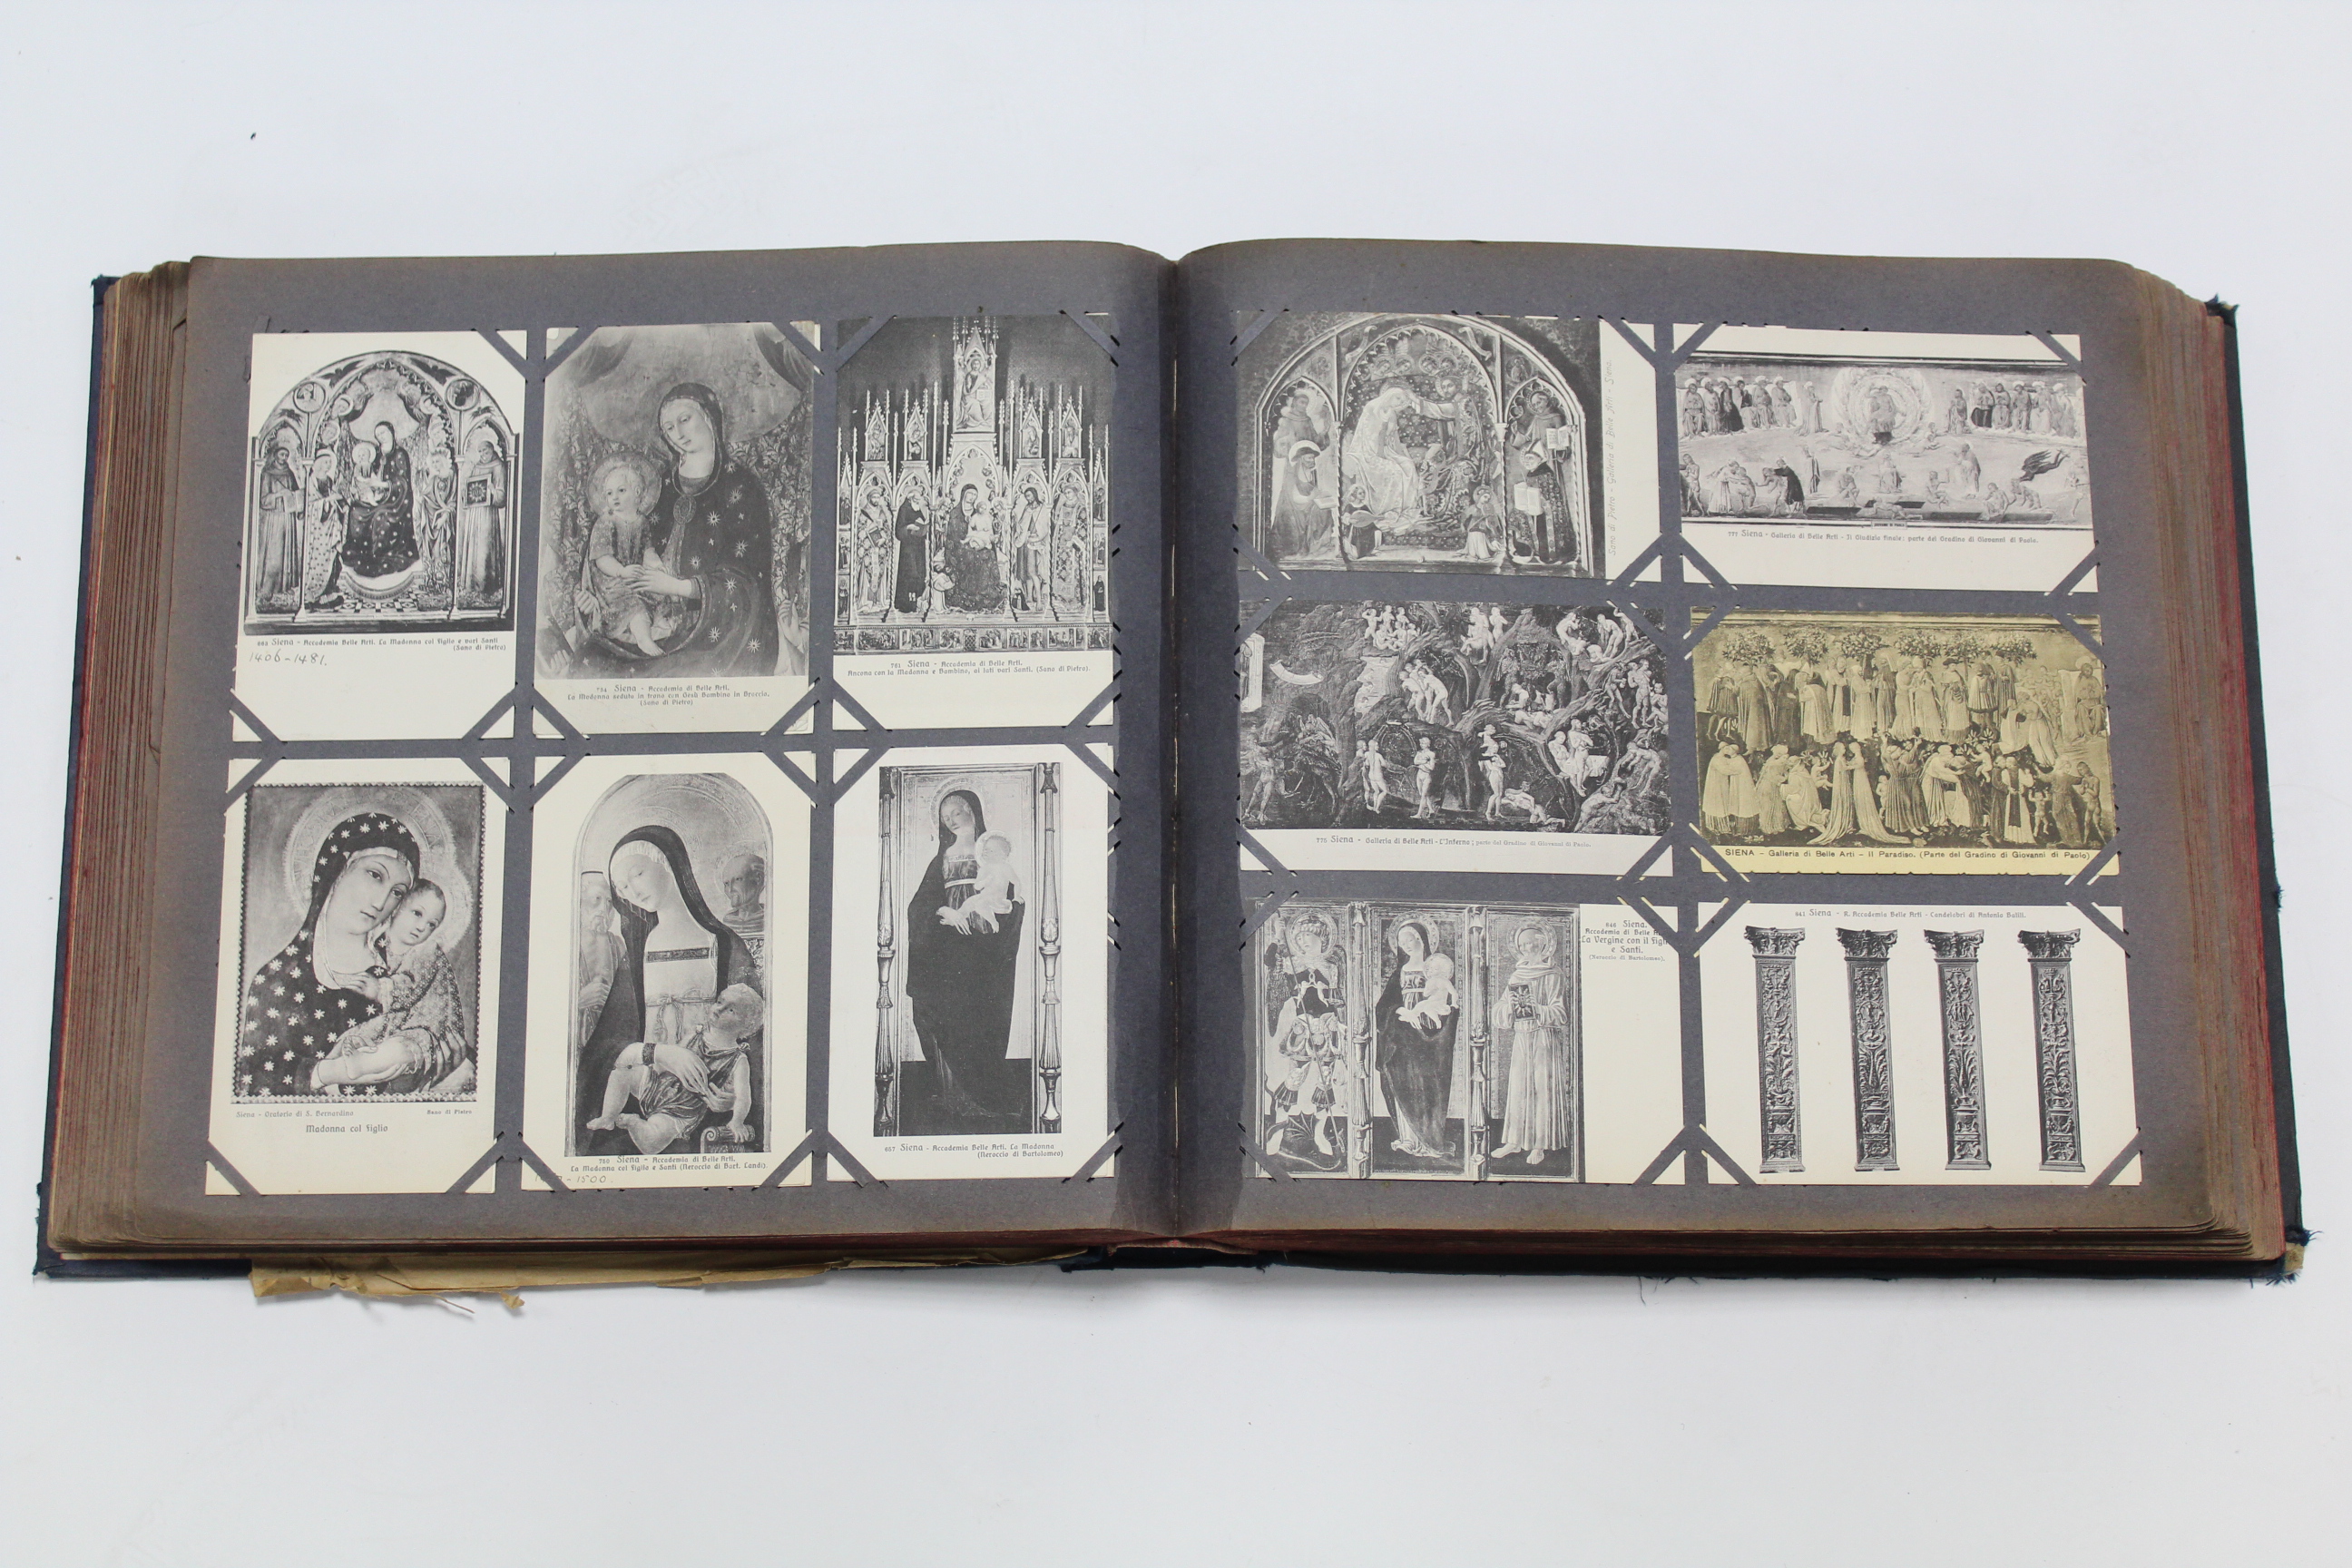 AN ALBUM OF APPROXIMATELY SIX HUNDRED POSTCARDS, EARLY 20th century, RELIGIOUS FIGURES AND - Image 2 of 4